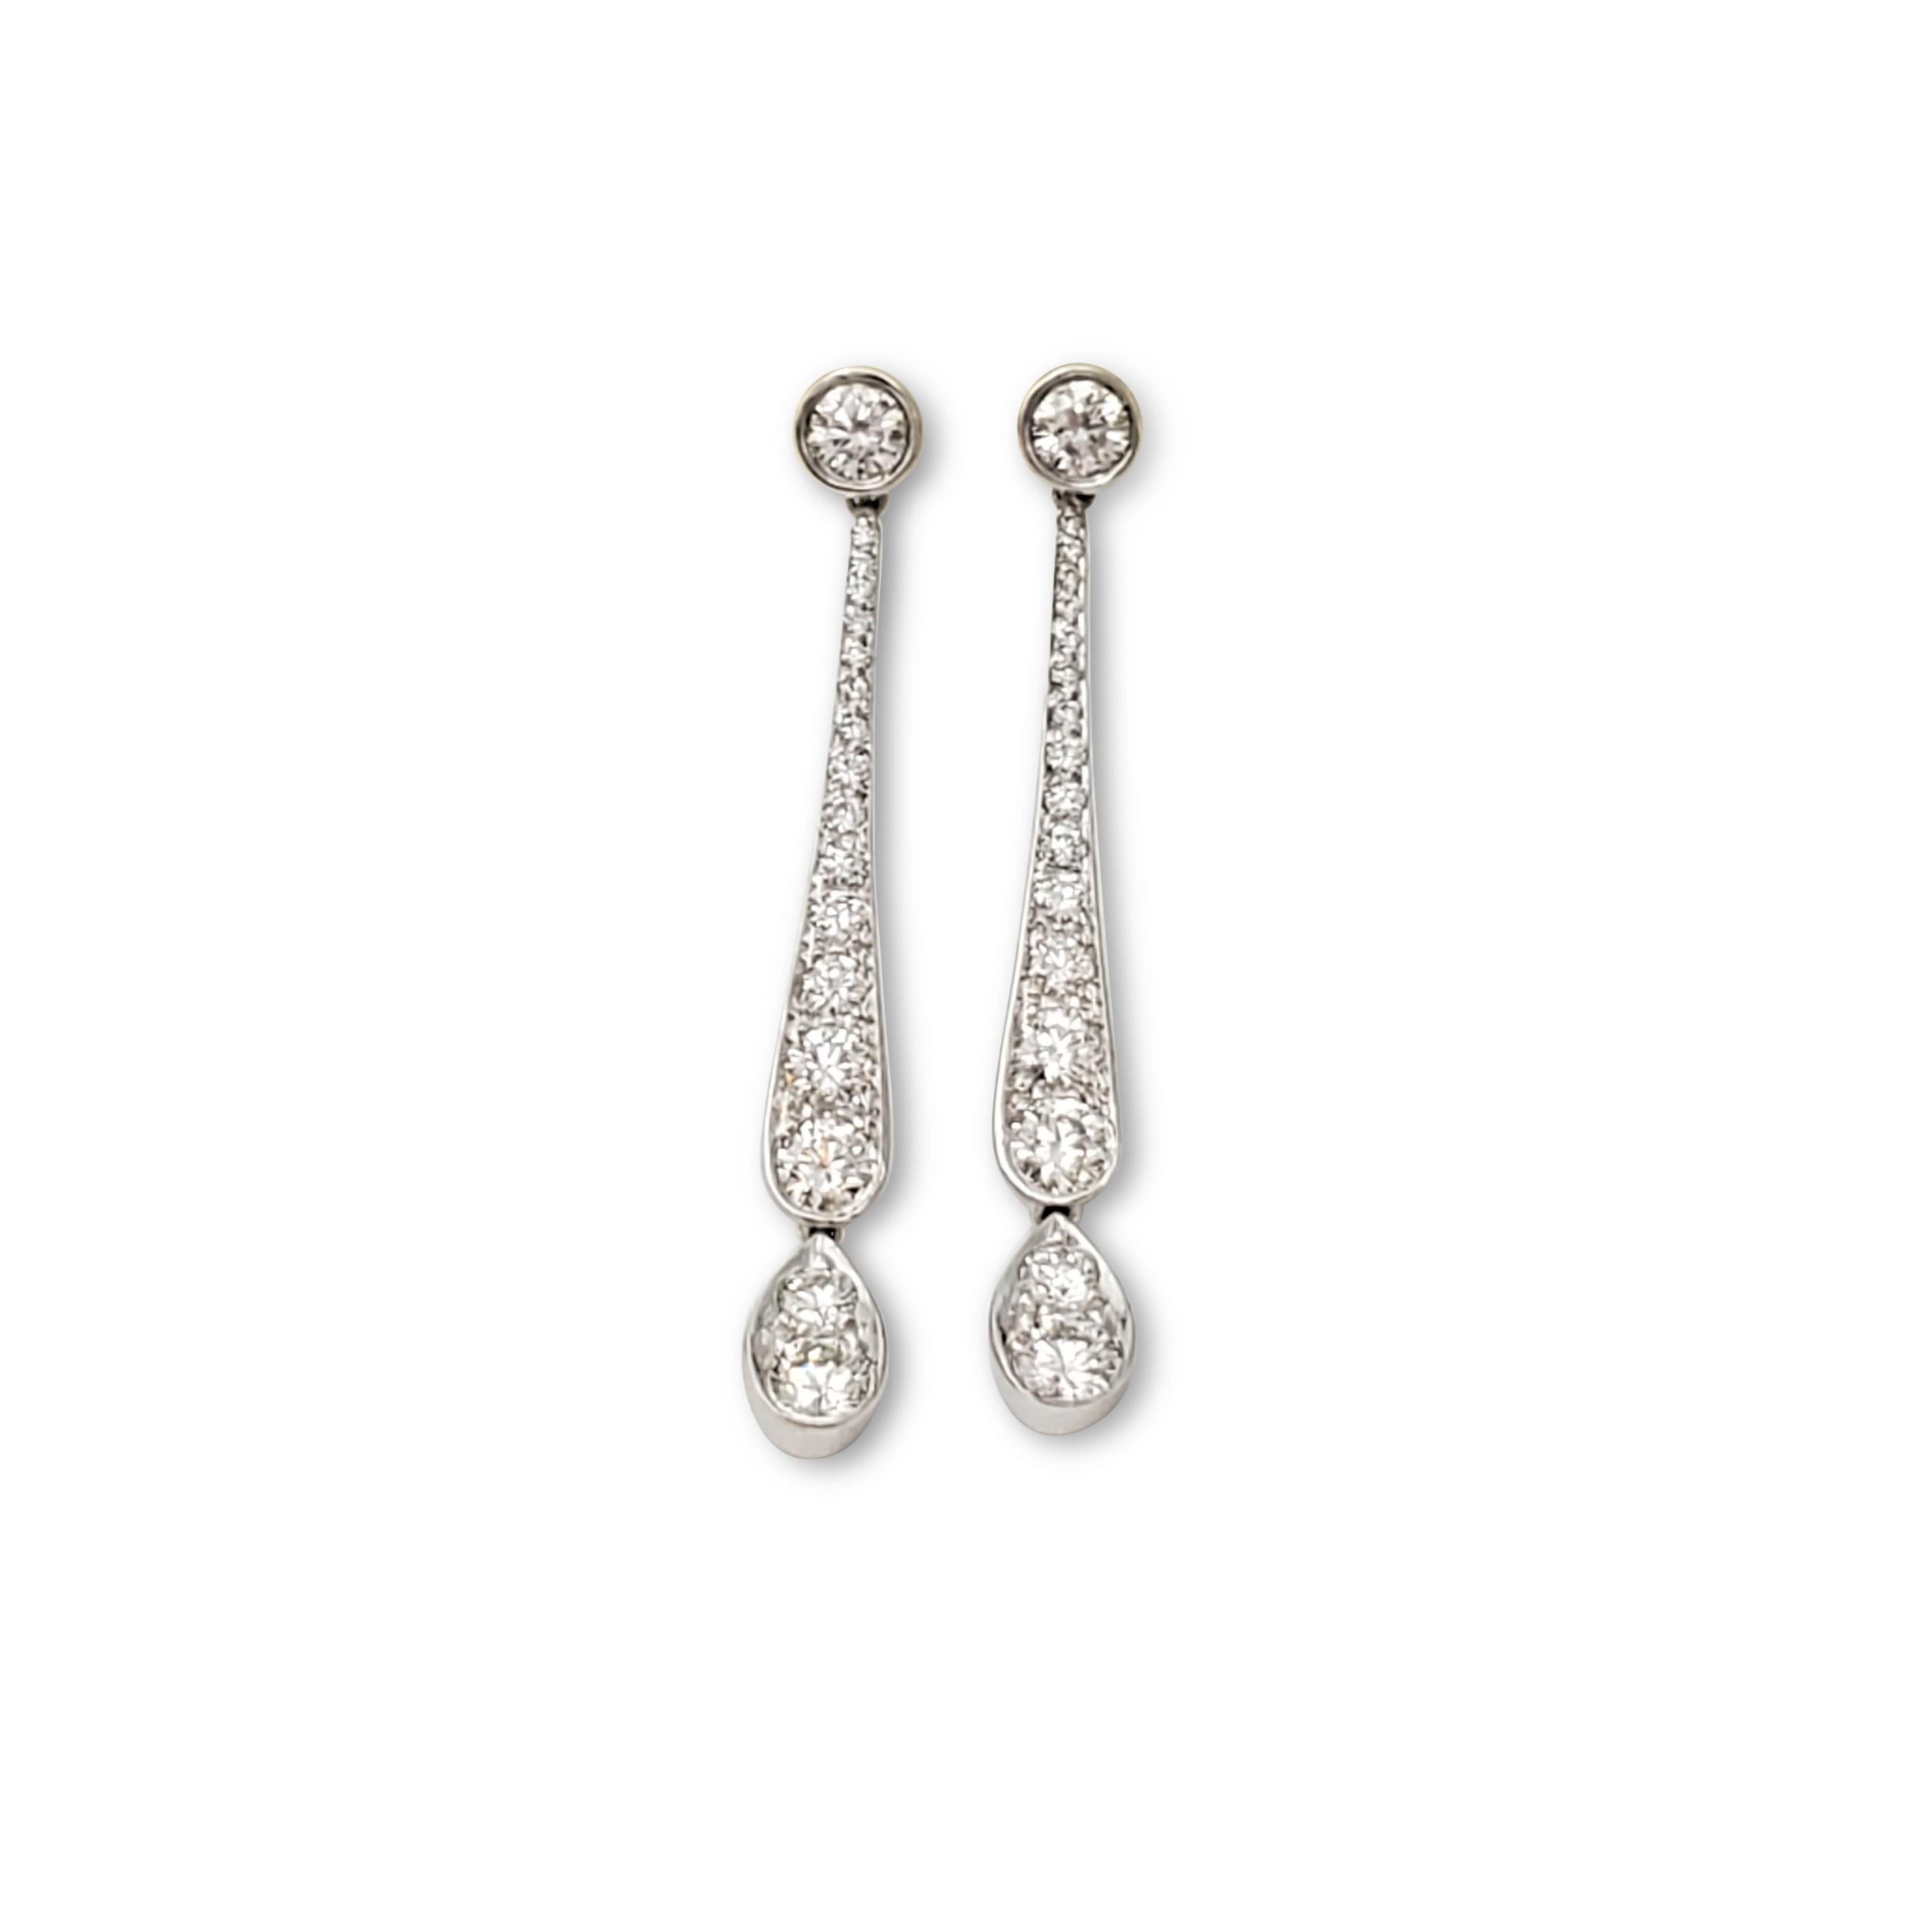 Authentic Tiffany & Co. swing drop earrings from the 'Legacy' collection crafted in platinum and set with an estimated 0.56 carats of round brilliant cut diamonds (E-F color, VS clarity). Signed T&Co., PT950. The earrings are presented with the